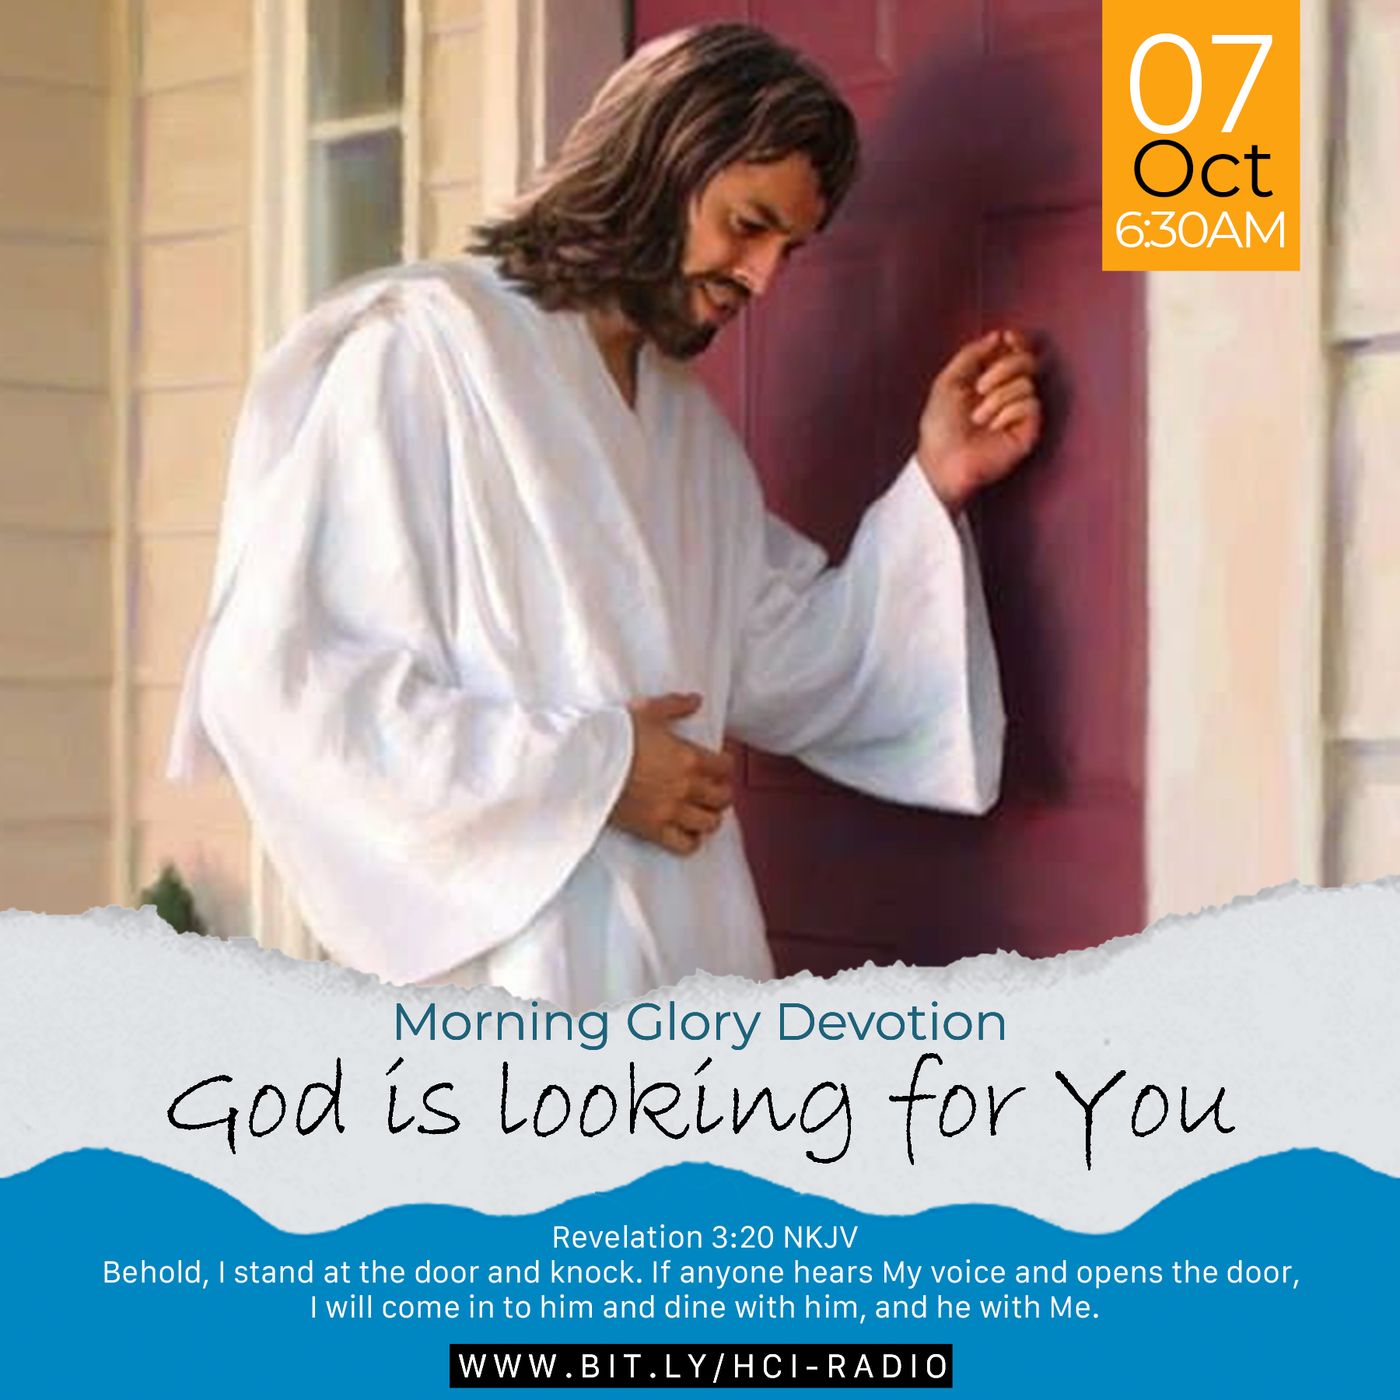 MGD: God is Looking for You